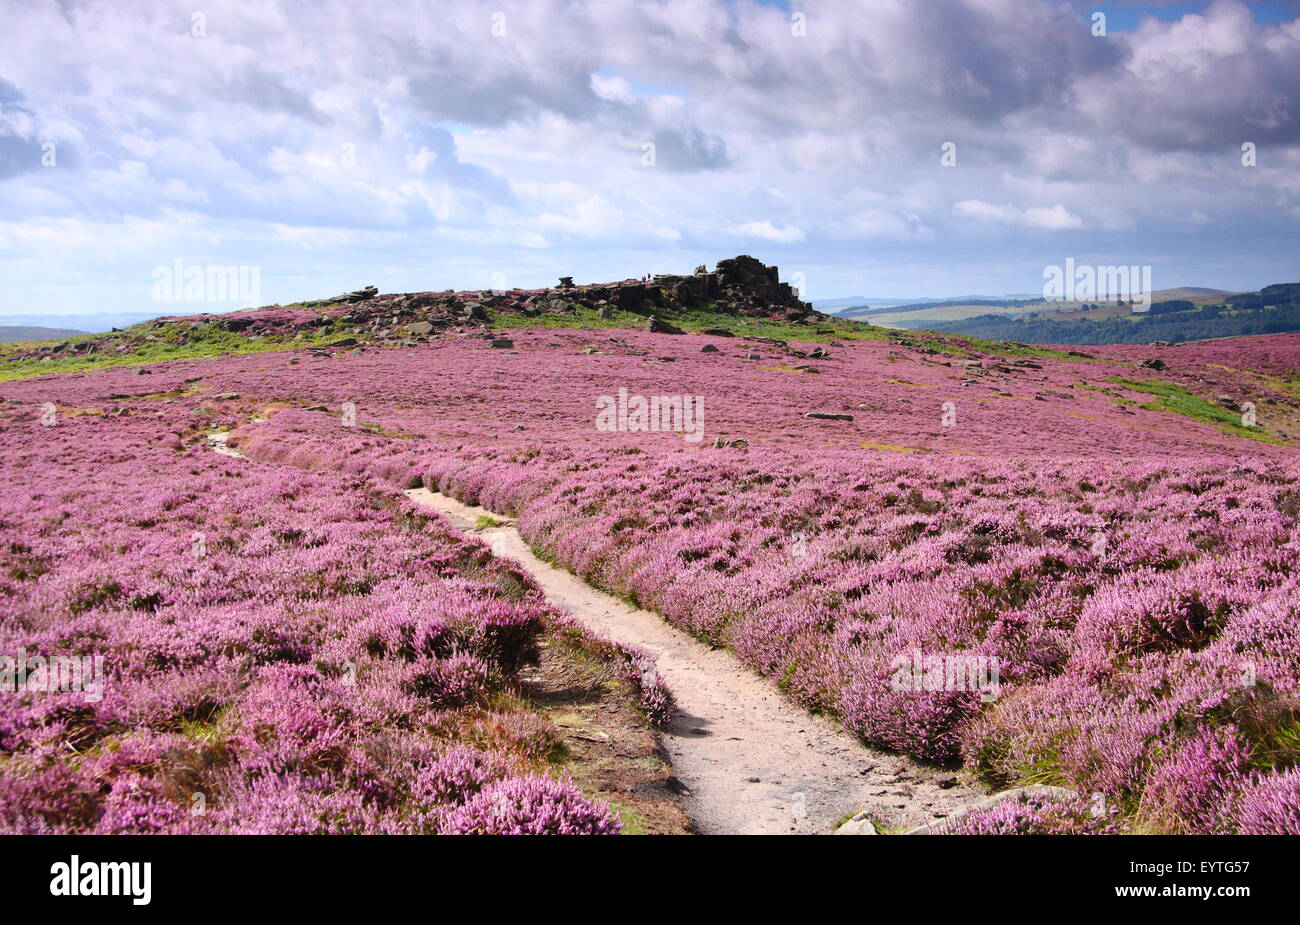 Blossoming Heather (calluna vulgaris) fringes a path on Hathersage Moor in the Peak District National Park, Yorkshire England UK Stock Photo